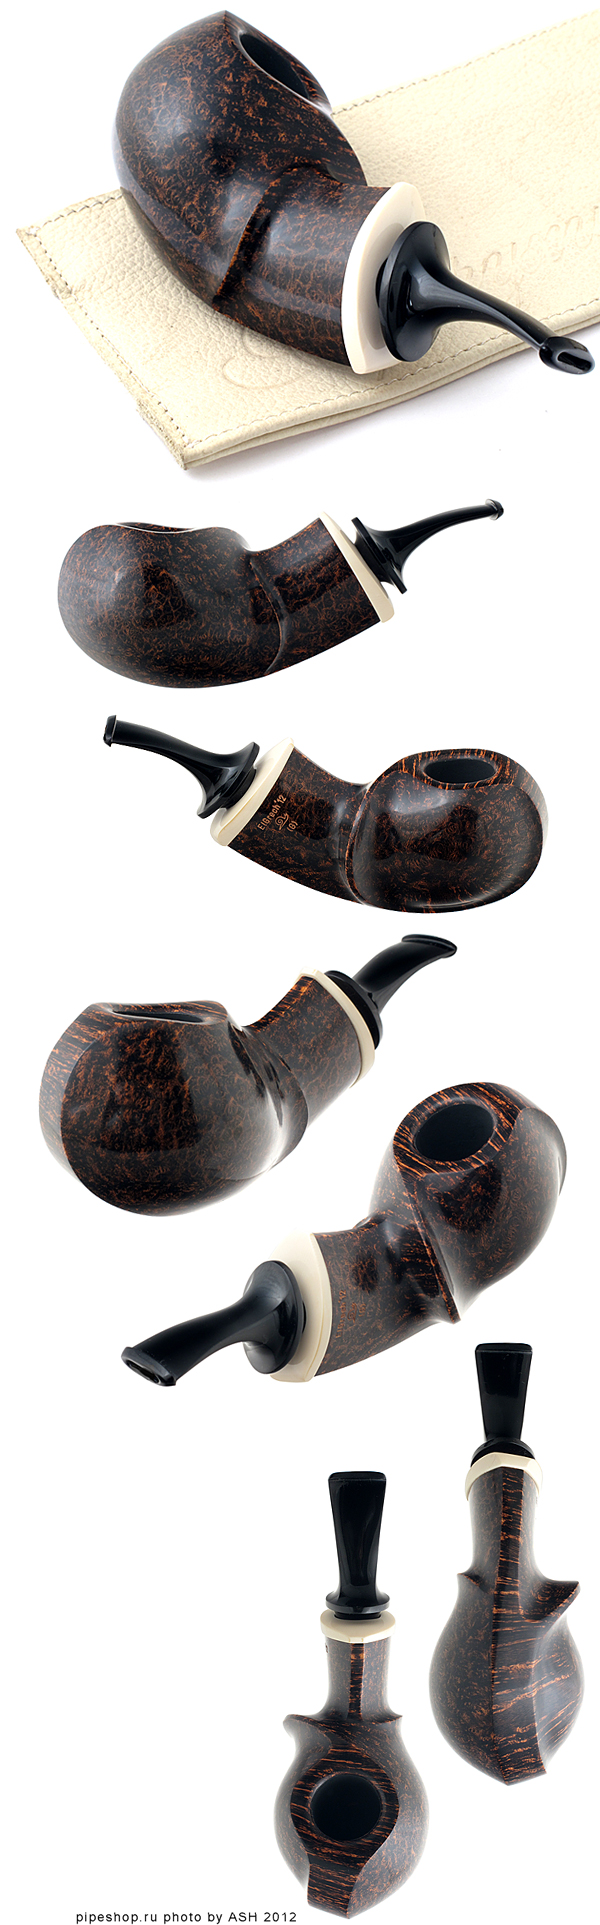   ELGRECH`12 SMOOTH BLOWFISH WITH IVORY "SNAIL" "G"